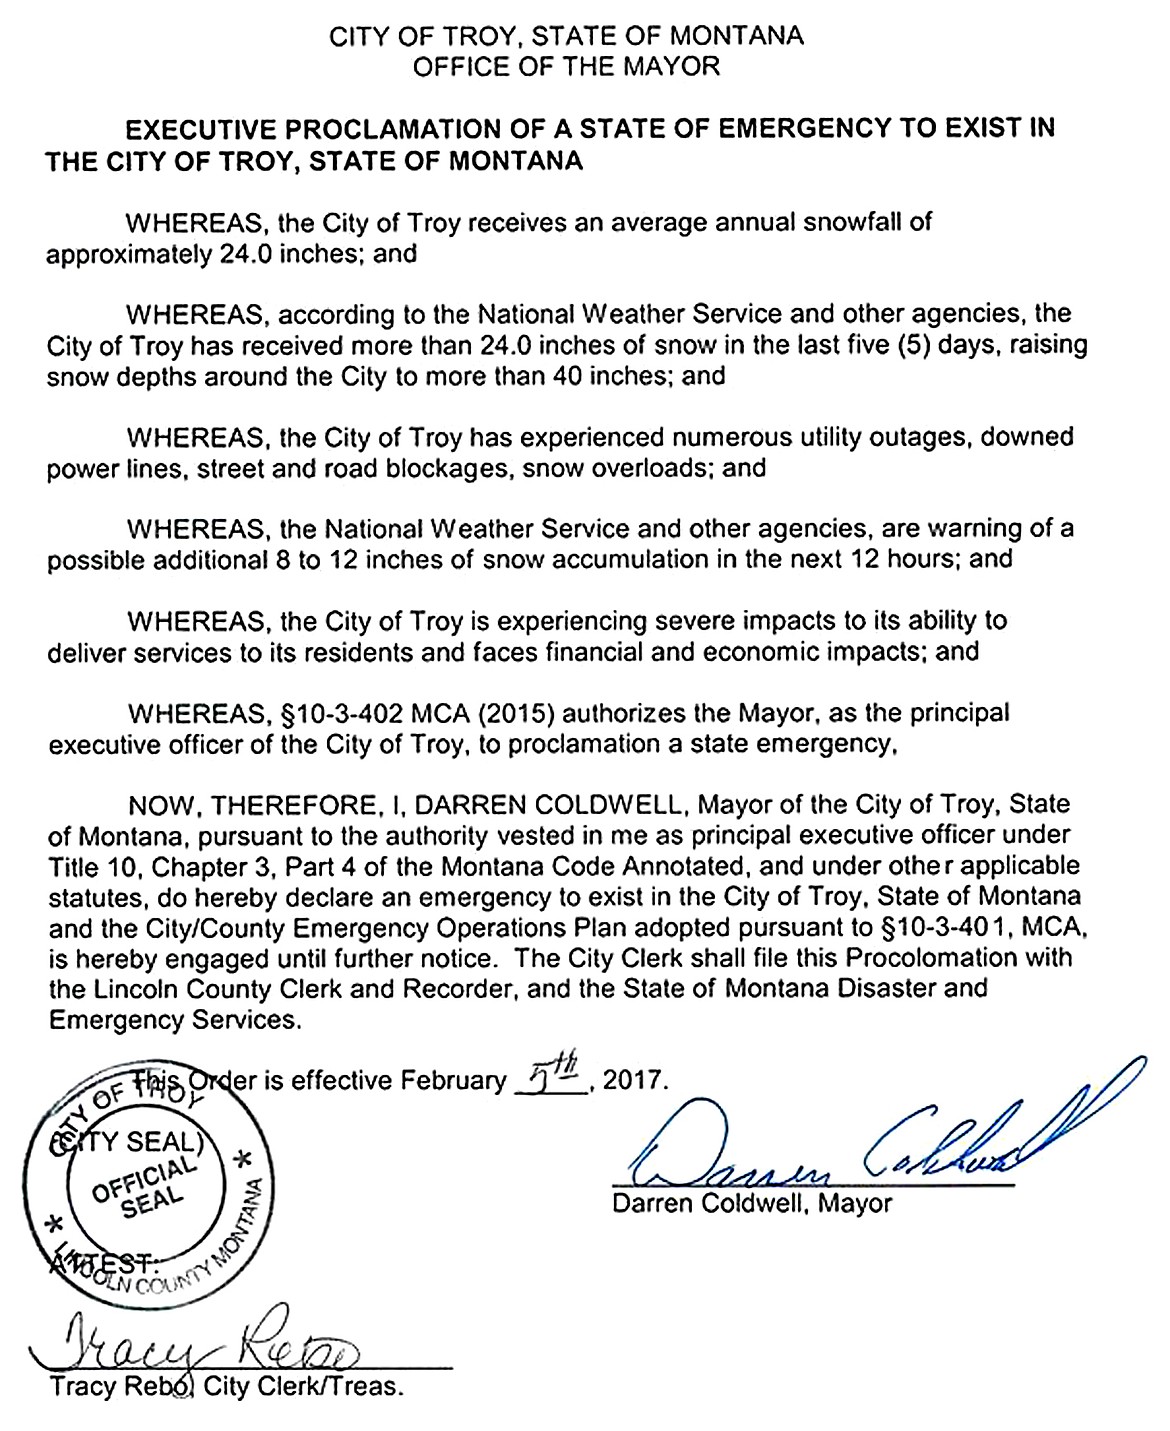 Mayor Darren Coldwell has signed an executive proclamation of a state of emergency to exist in the City of Troy.